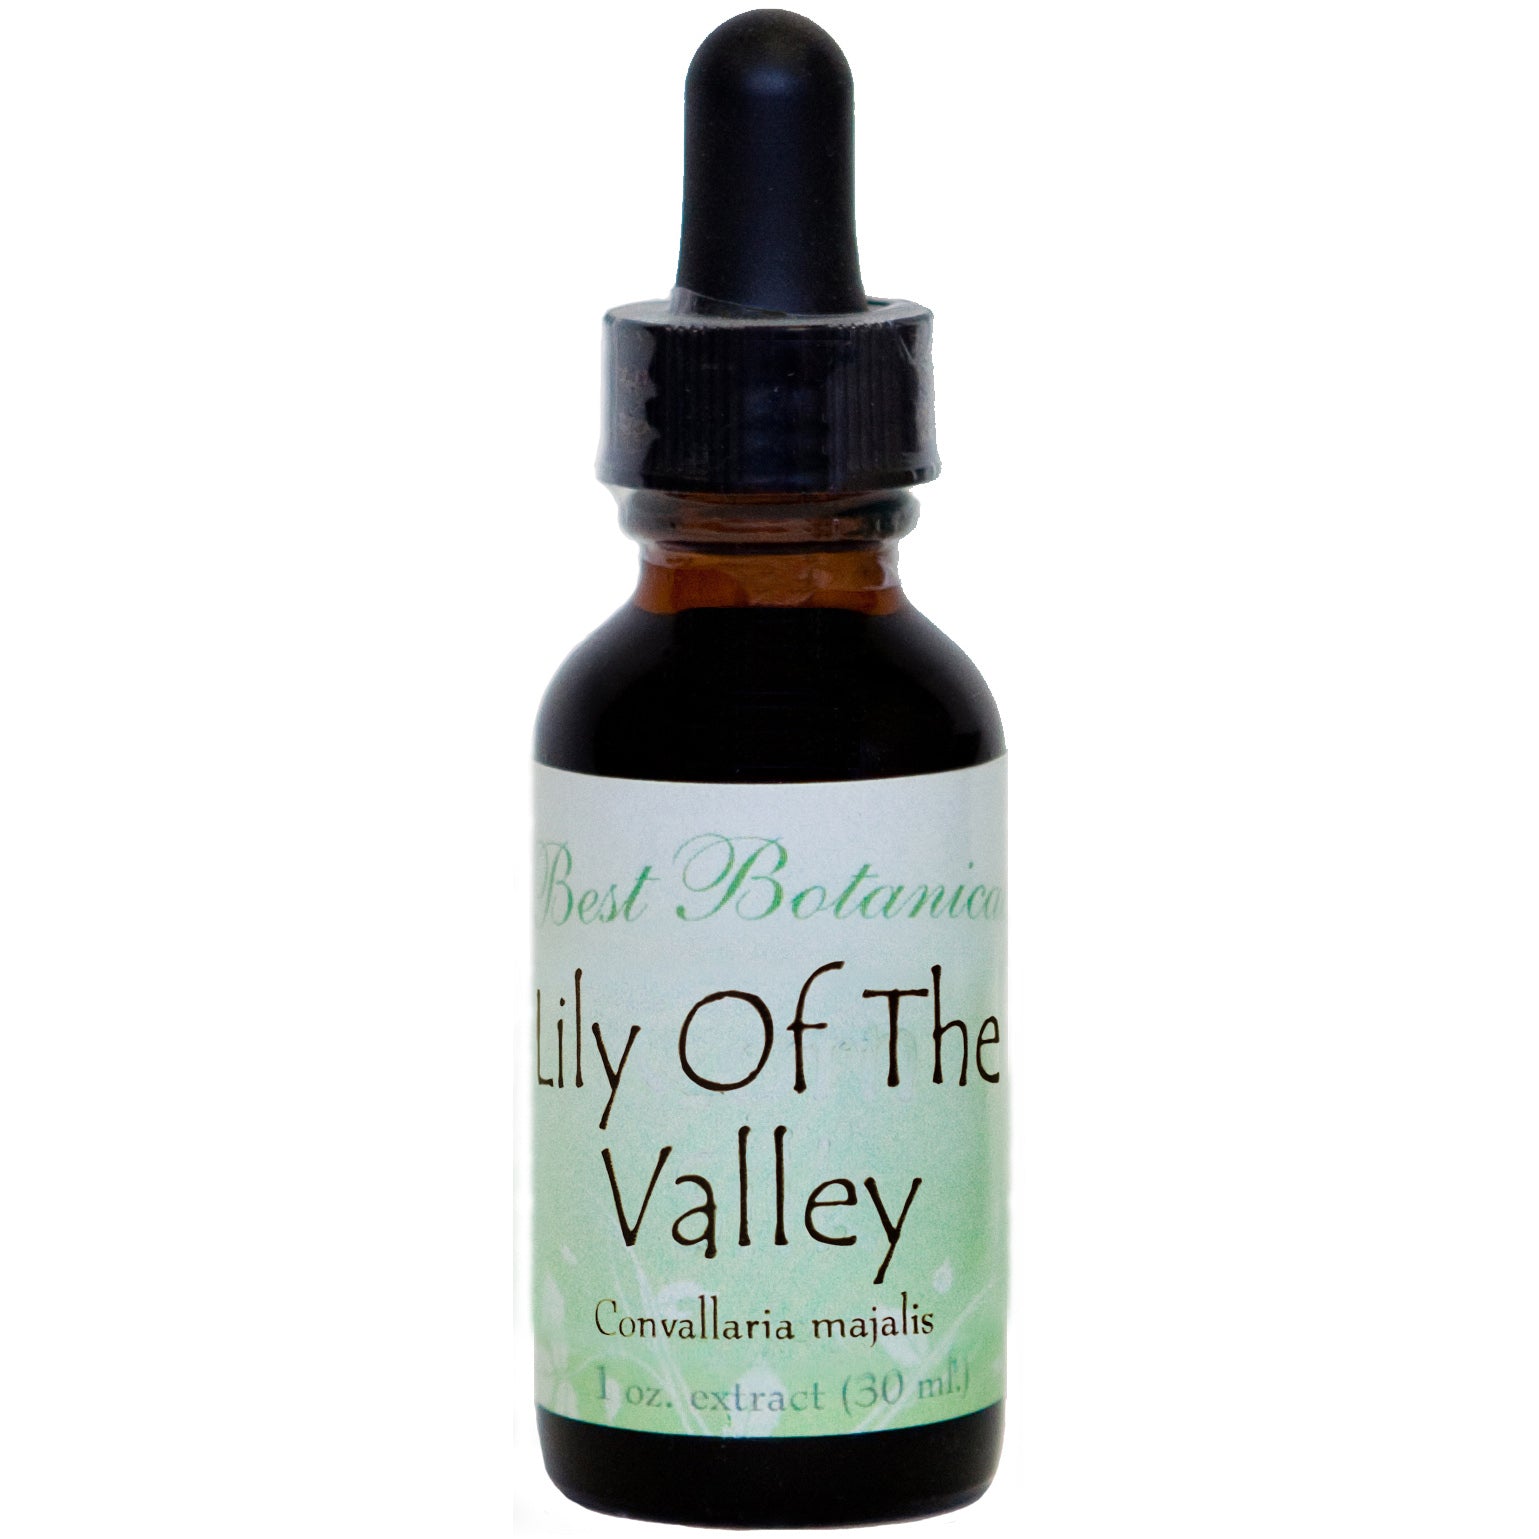 Lily Of The Valley Extract - BestBotanicals